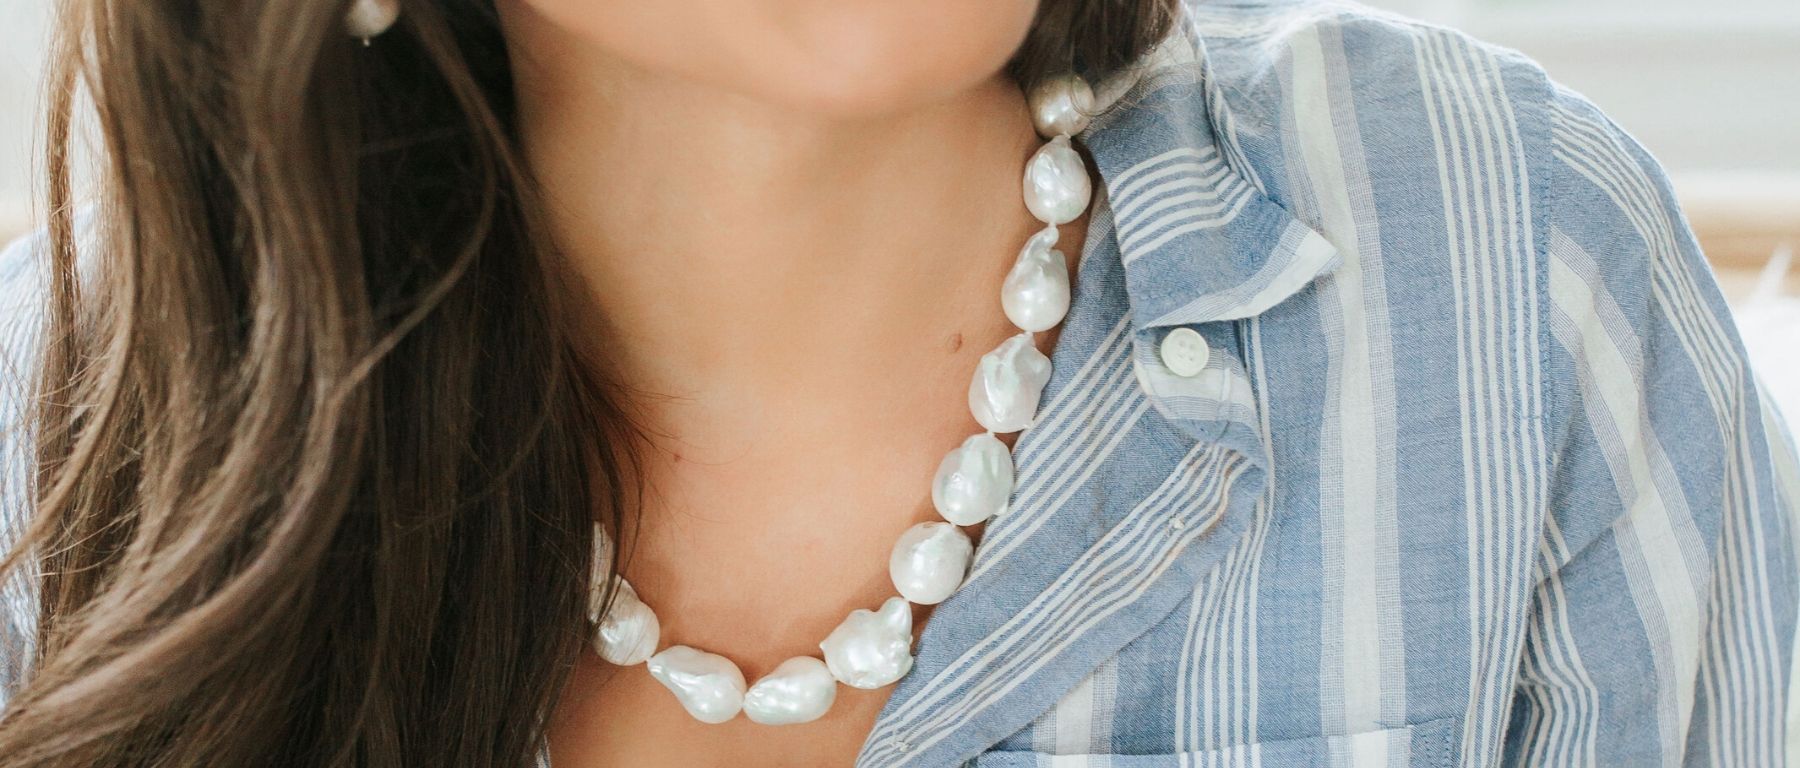 5 Occasions That Call for Pearls: How to Make Them Work for Your Style